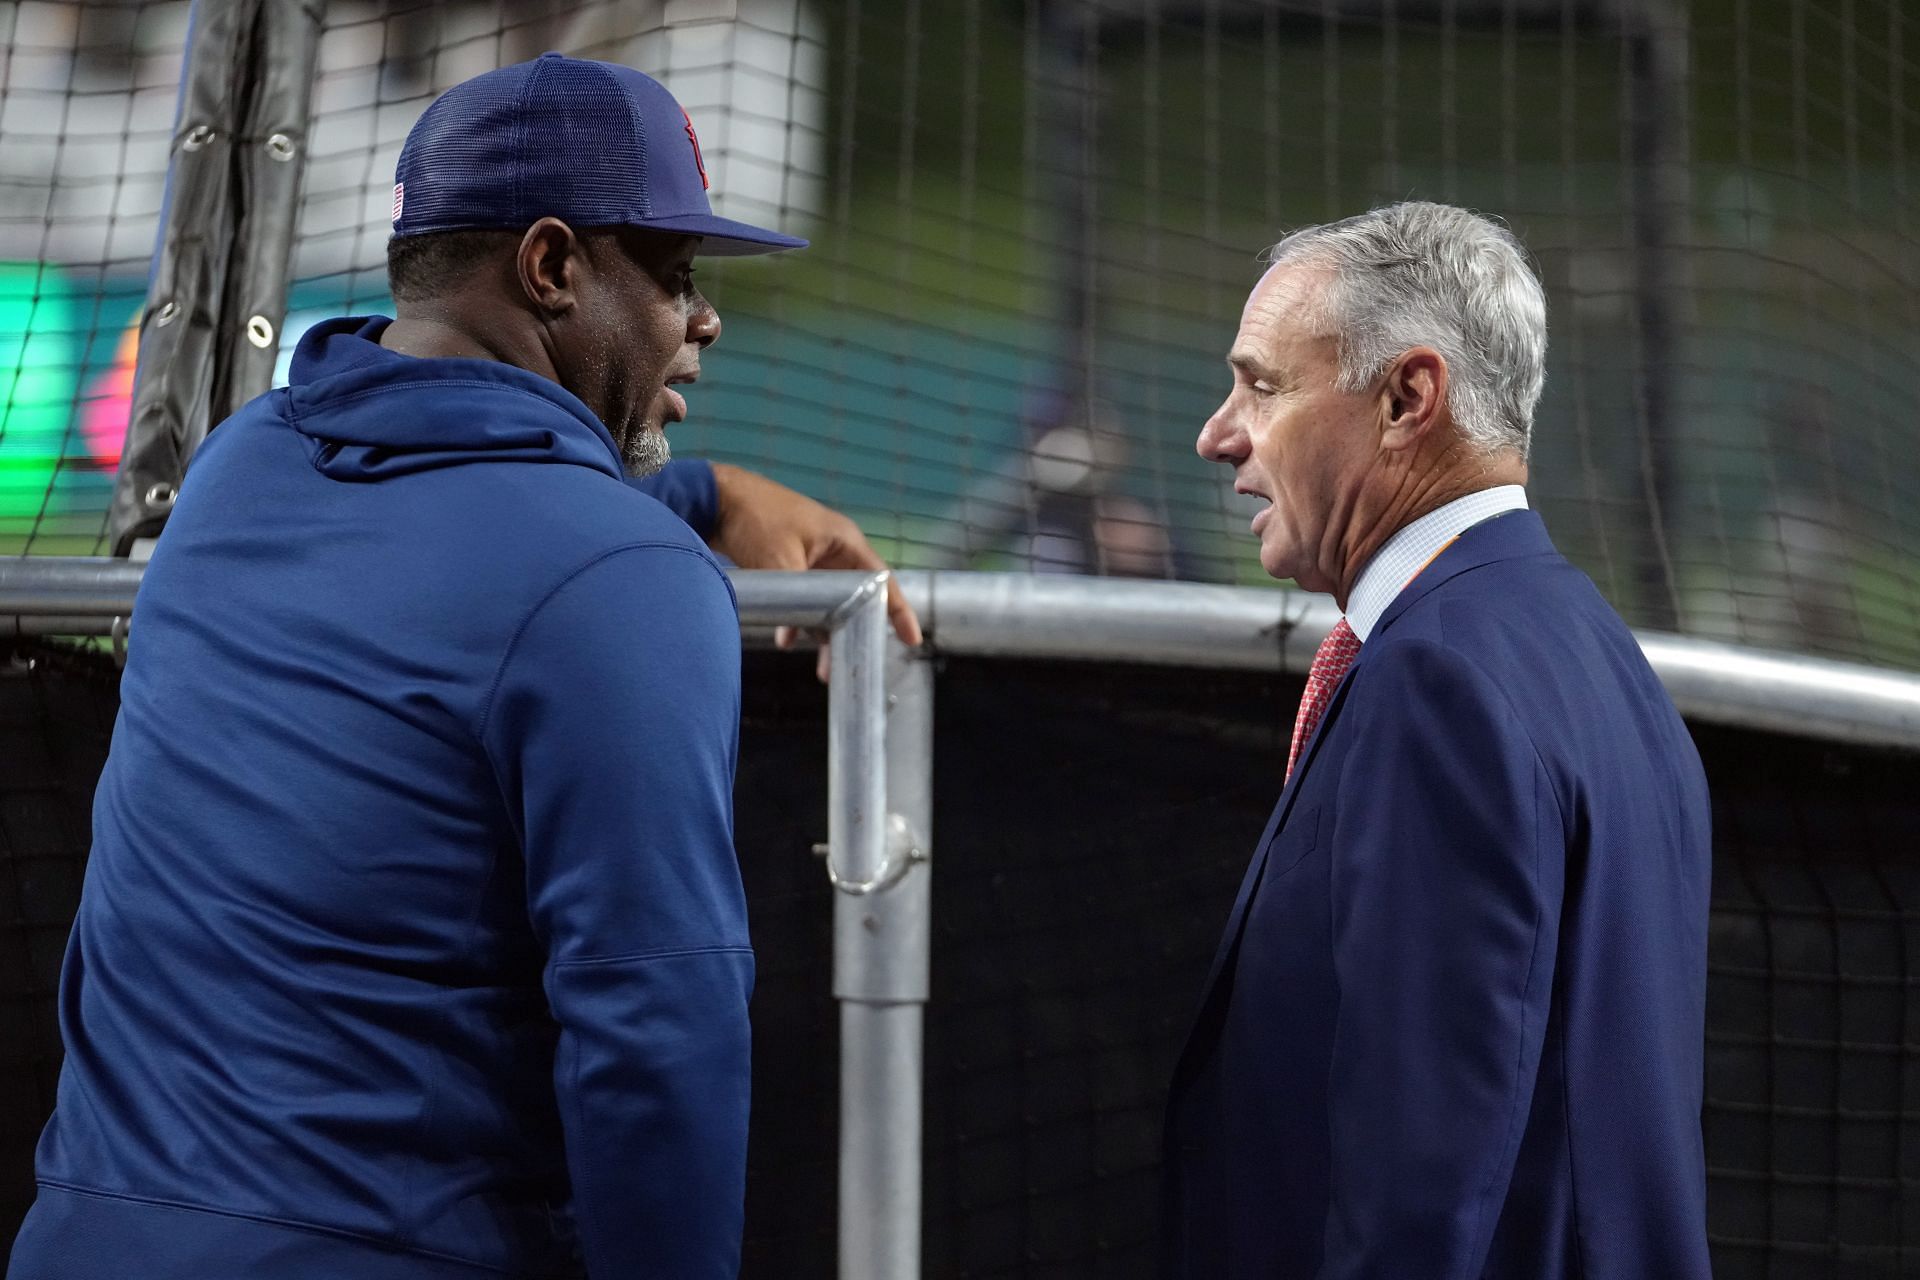 MLB commissioner Rob Manfred speaks with Team USA coach Ken Griffey Jr.